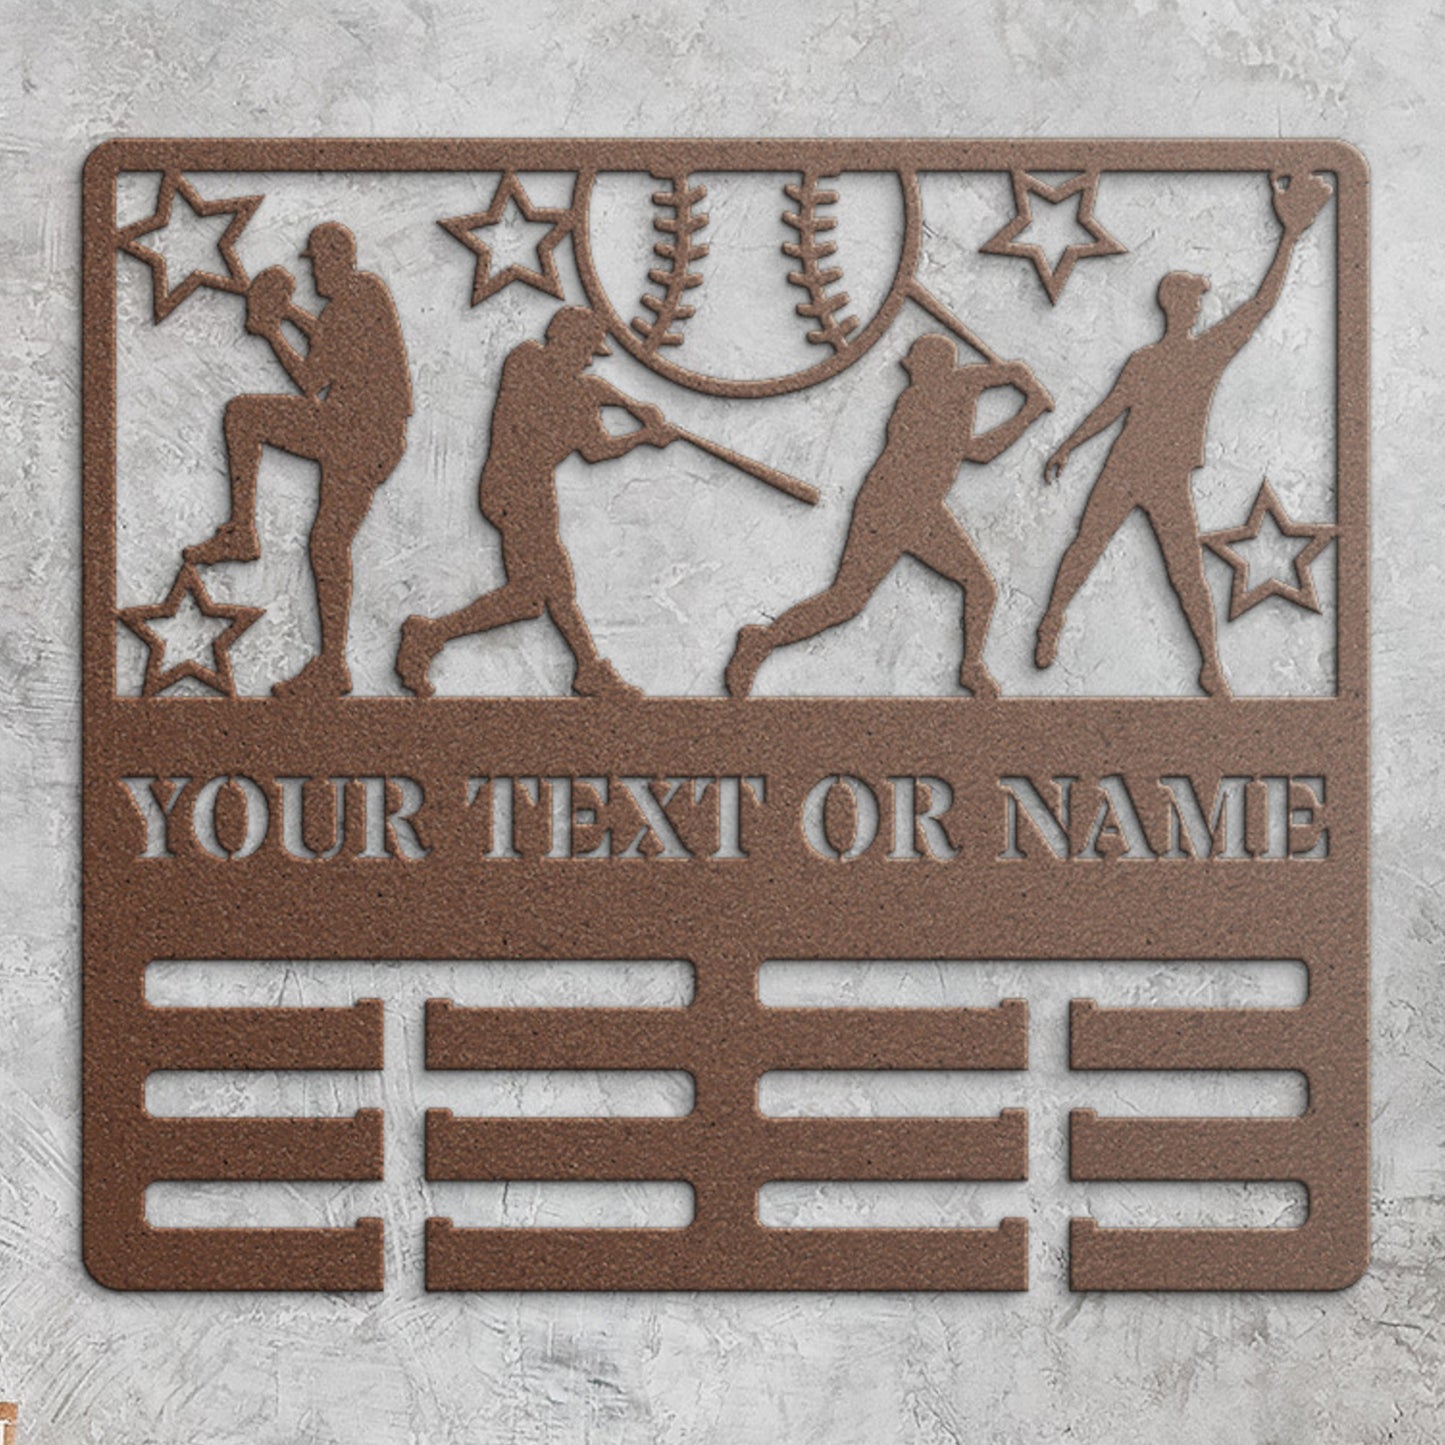 Personalize Softball medal holder Name Metal Sign. Custom Medal Display Gift. Athlete Medals Wall Hanging. Sports Champion Wall Decor Gift